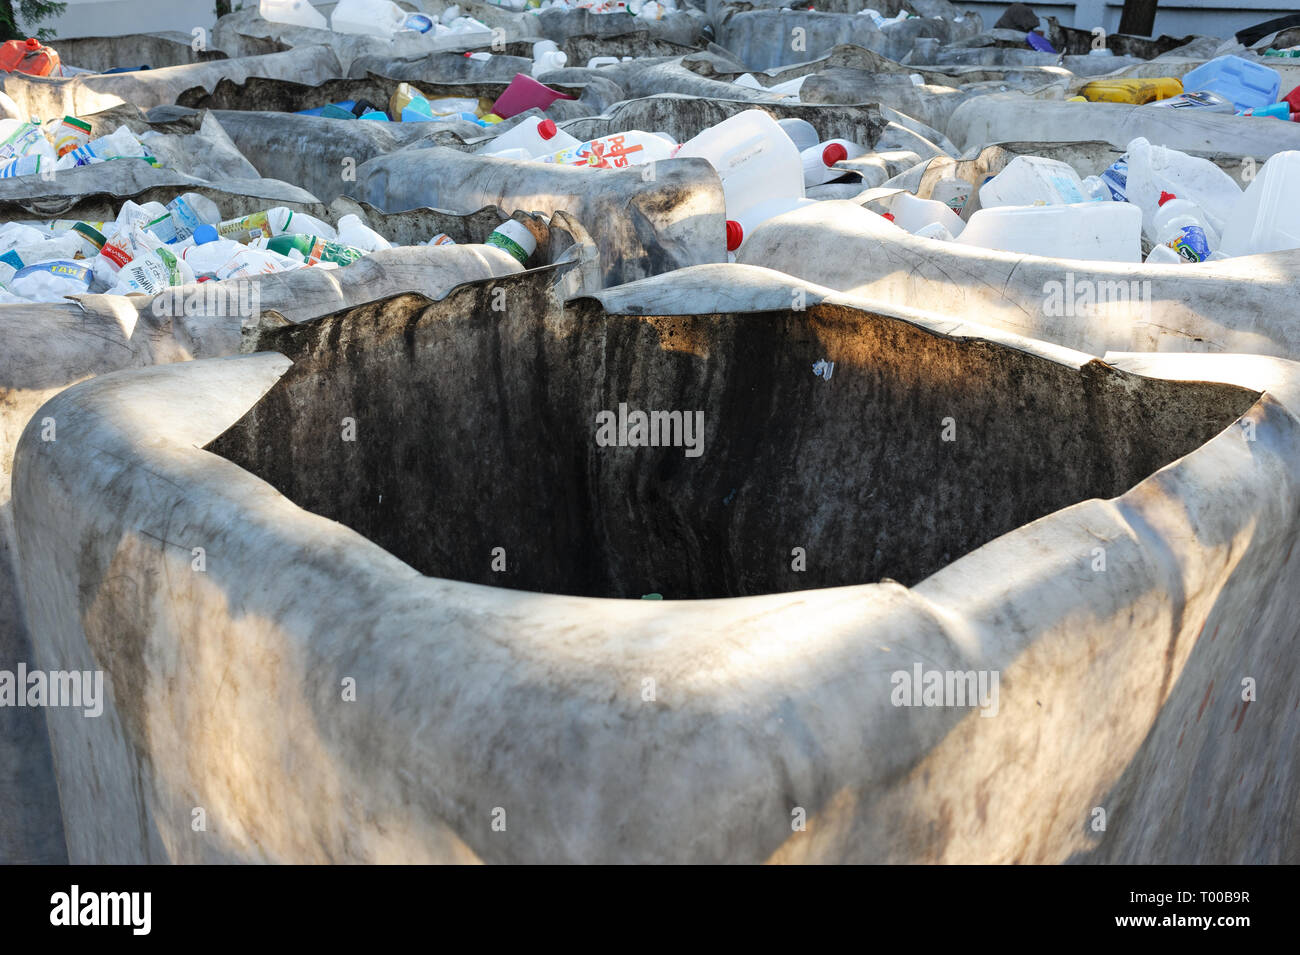 Plant For Processing Plastic Bottles and Recycled Materials. Stock Photo